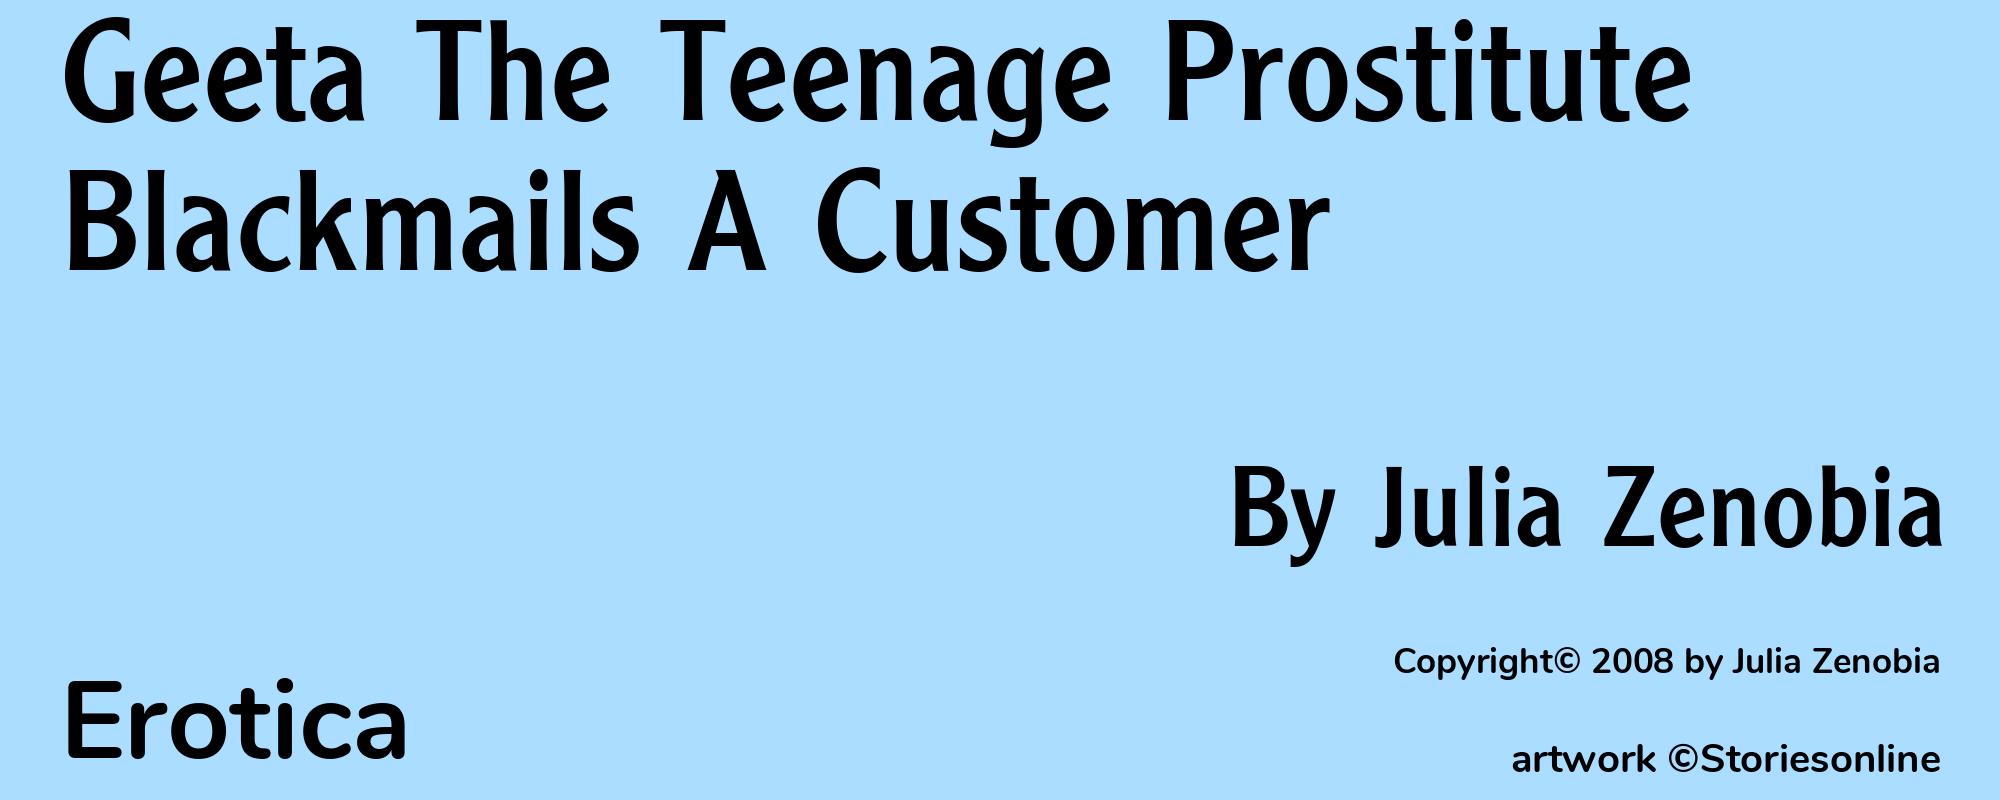 Geeta The Teenage Prostitute Blackmails A Customer - Cover